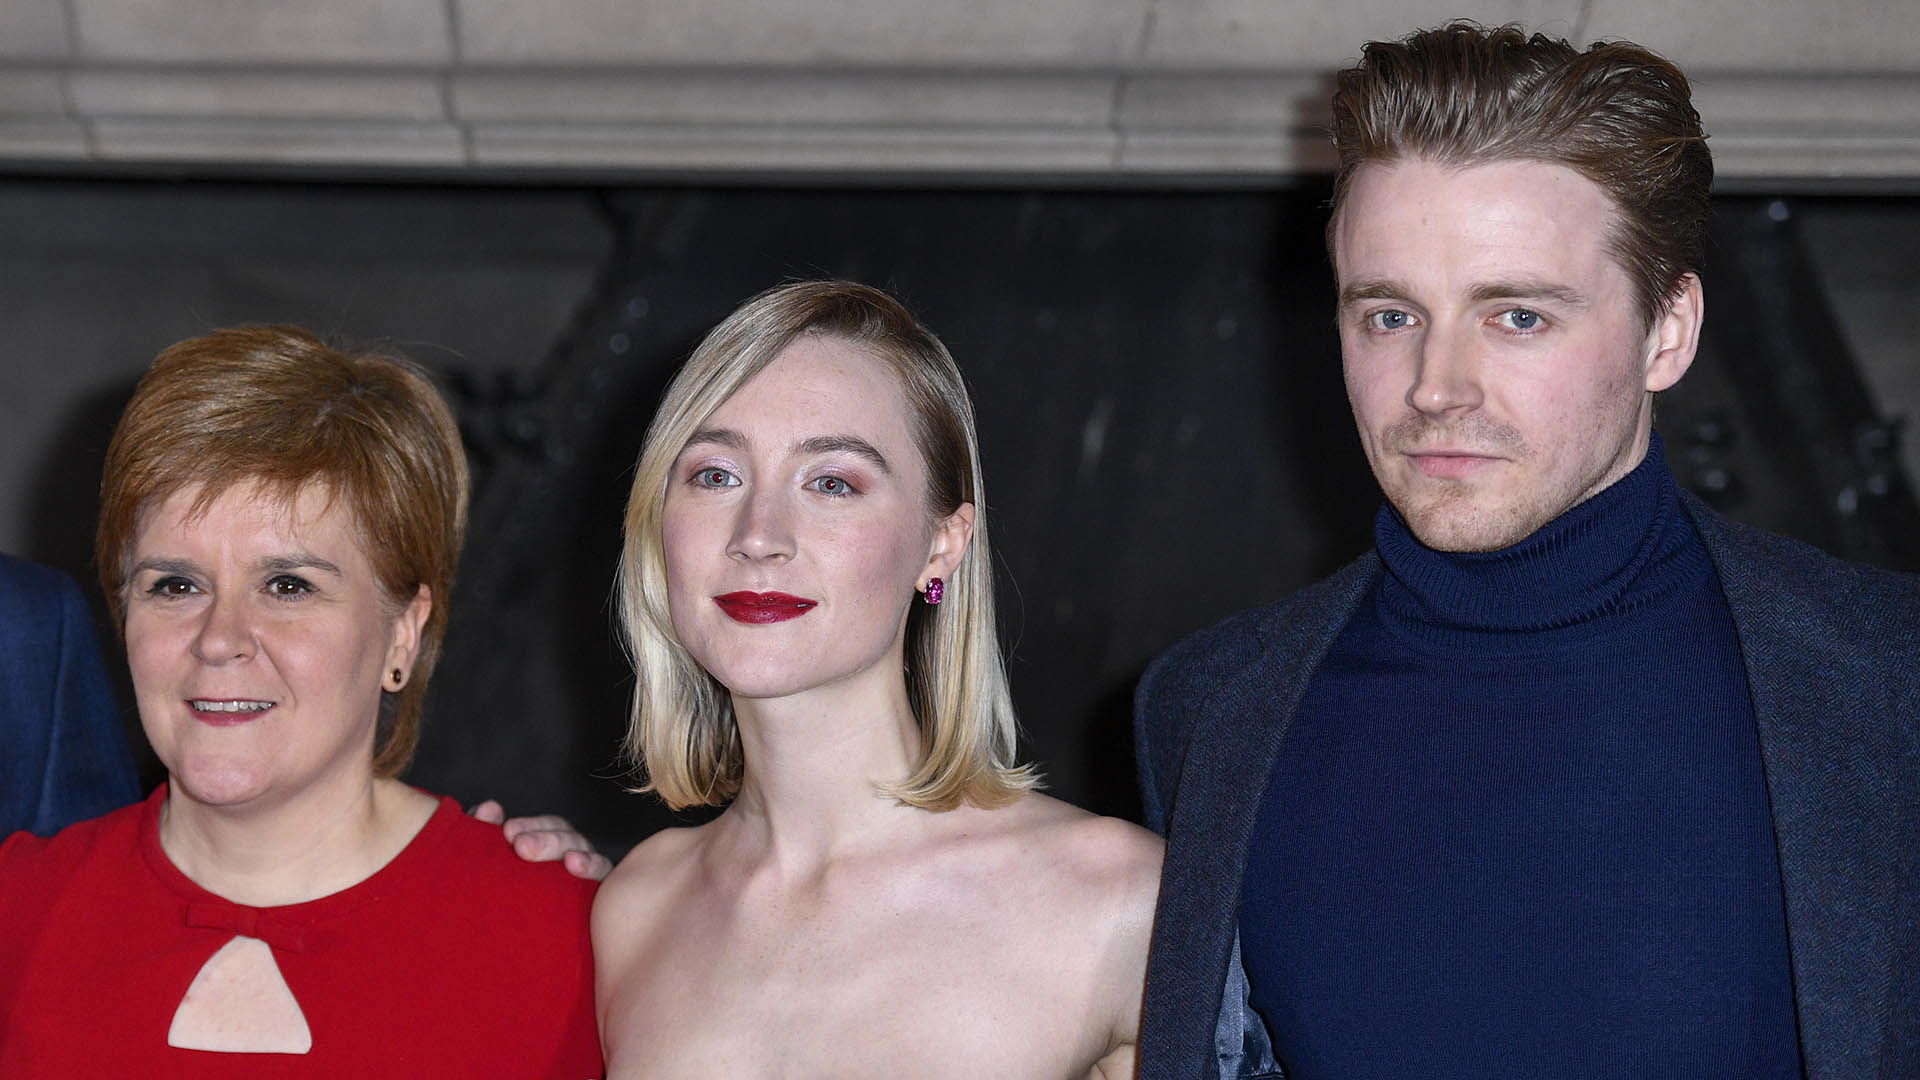 Nicola Sturgeon, Saoirse Ronan and The Gold star Jack Lowden at the Scottish premiere of Mary Queen of Scots at Edinburgh castle. Credit: Euan Cherry/WENN